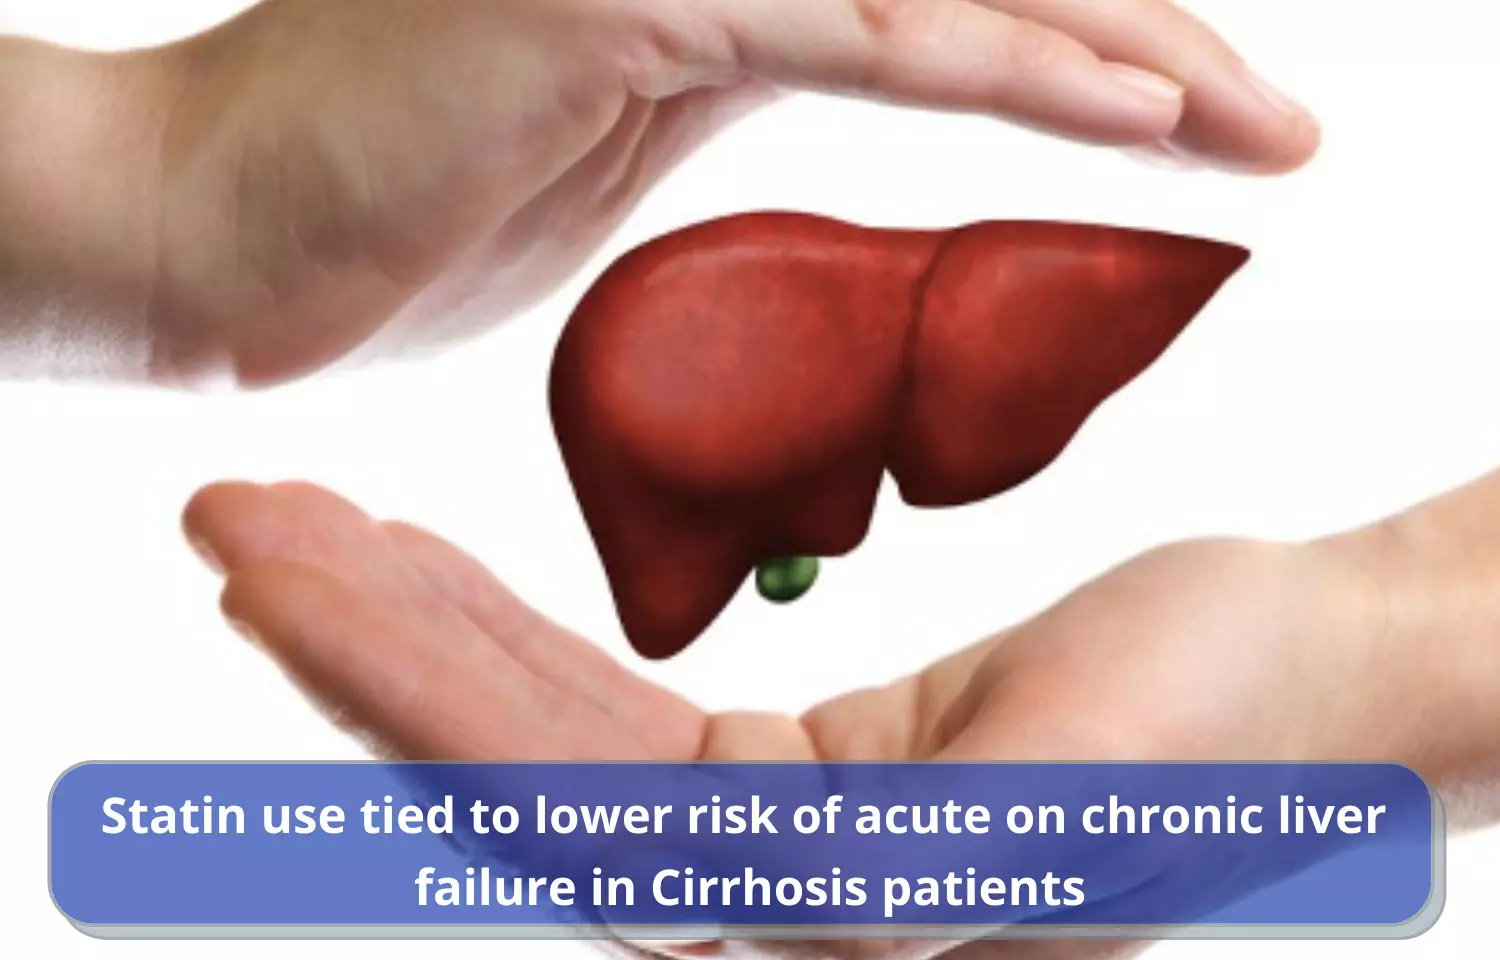 Journal Club - Statin use tied to lower risk of acute on chronic liver failure in Cirrhosis patients